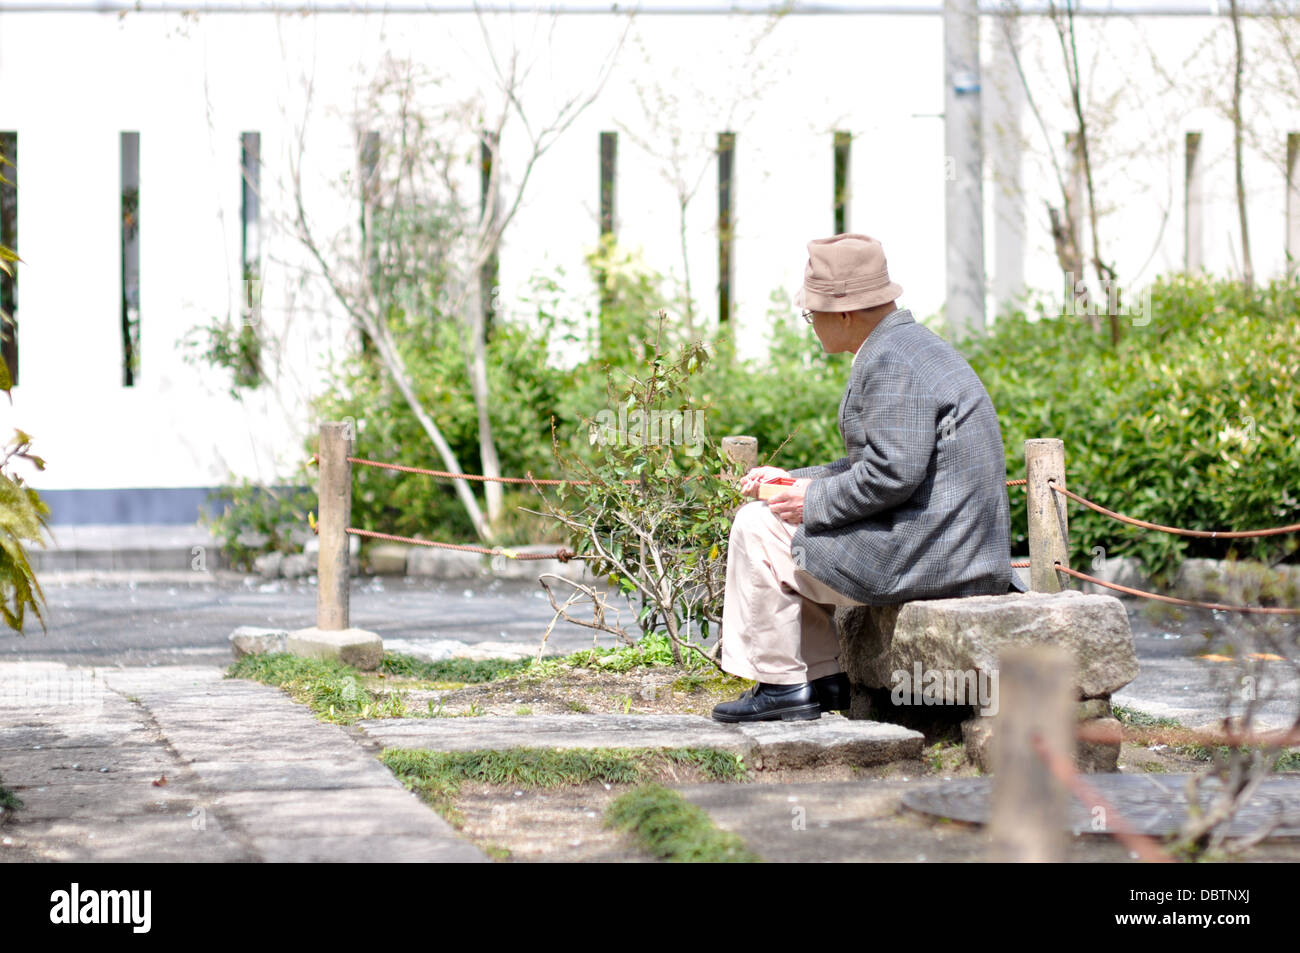 An elderly man sitting alone in a park in Japan. Stock Photo